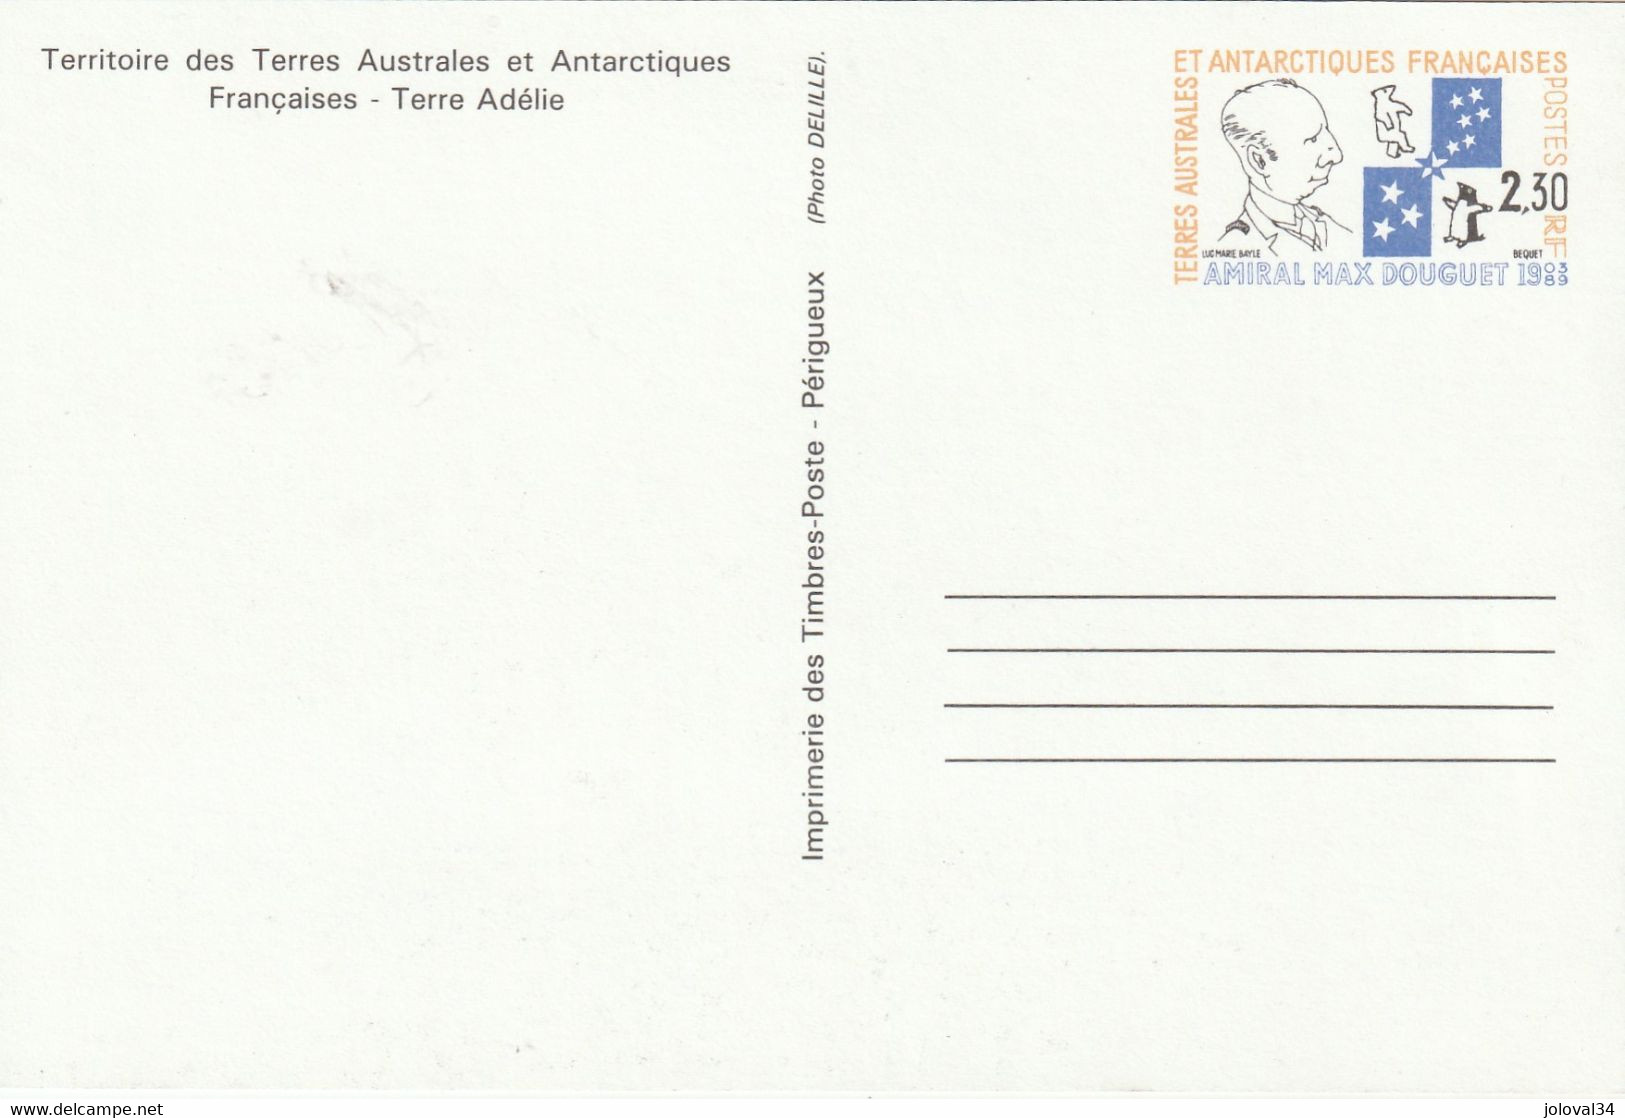 TAAF Yvert 1 CP Entier Postal Neuf - Amiral Max Douguet - Postal Stationery